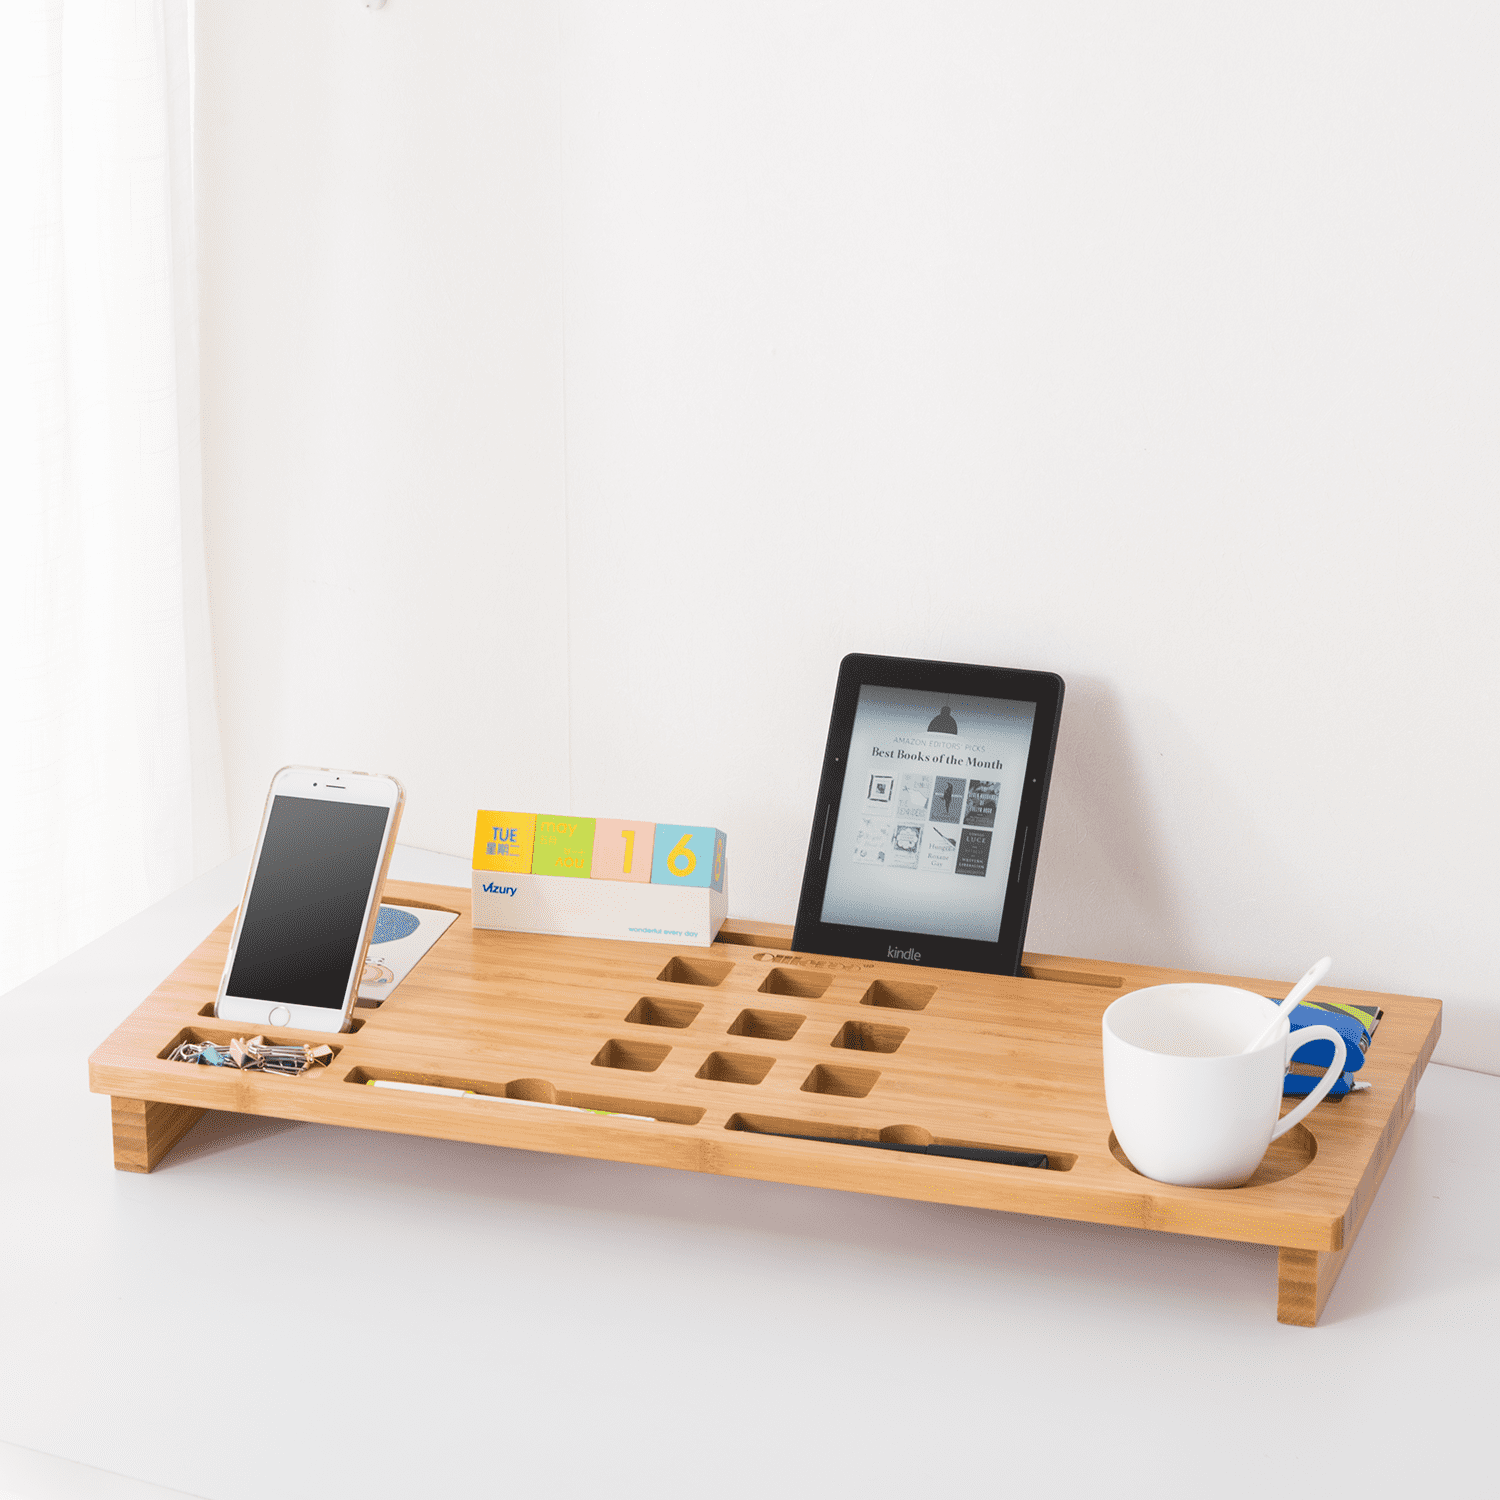 Top-Empfehlung Allieroo Natural Bamboo Computer Monitor Vents Air Storage and Stand Riser,Monitor Design Desk with Organizer